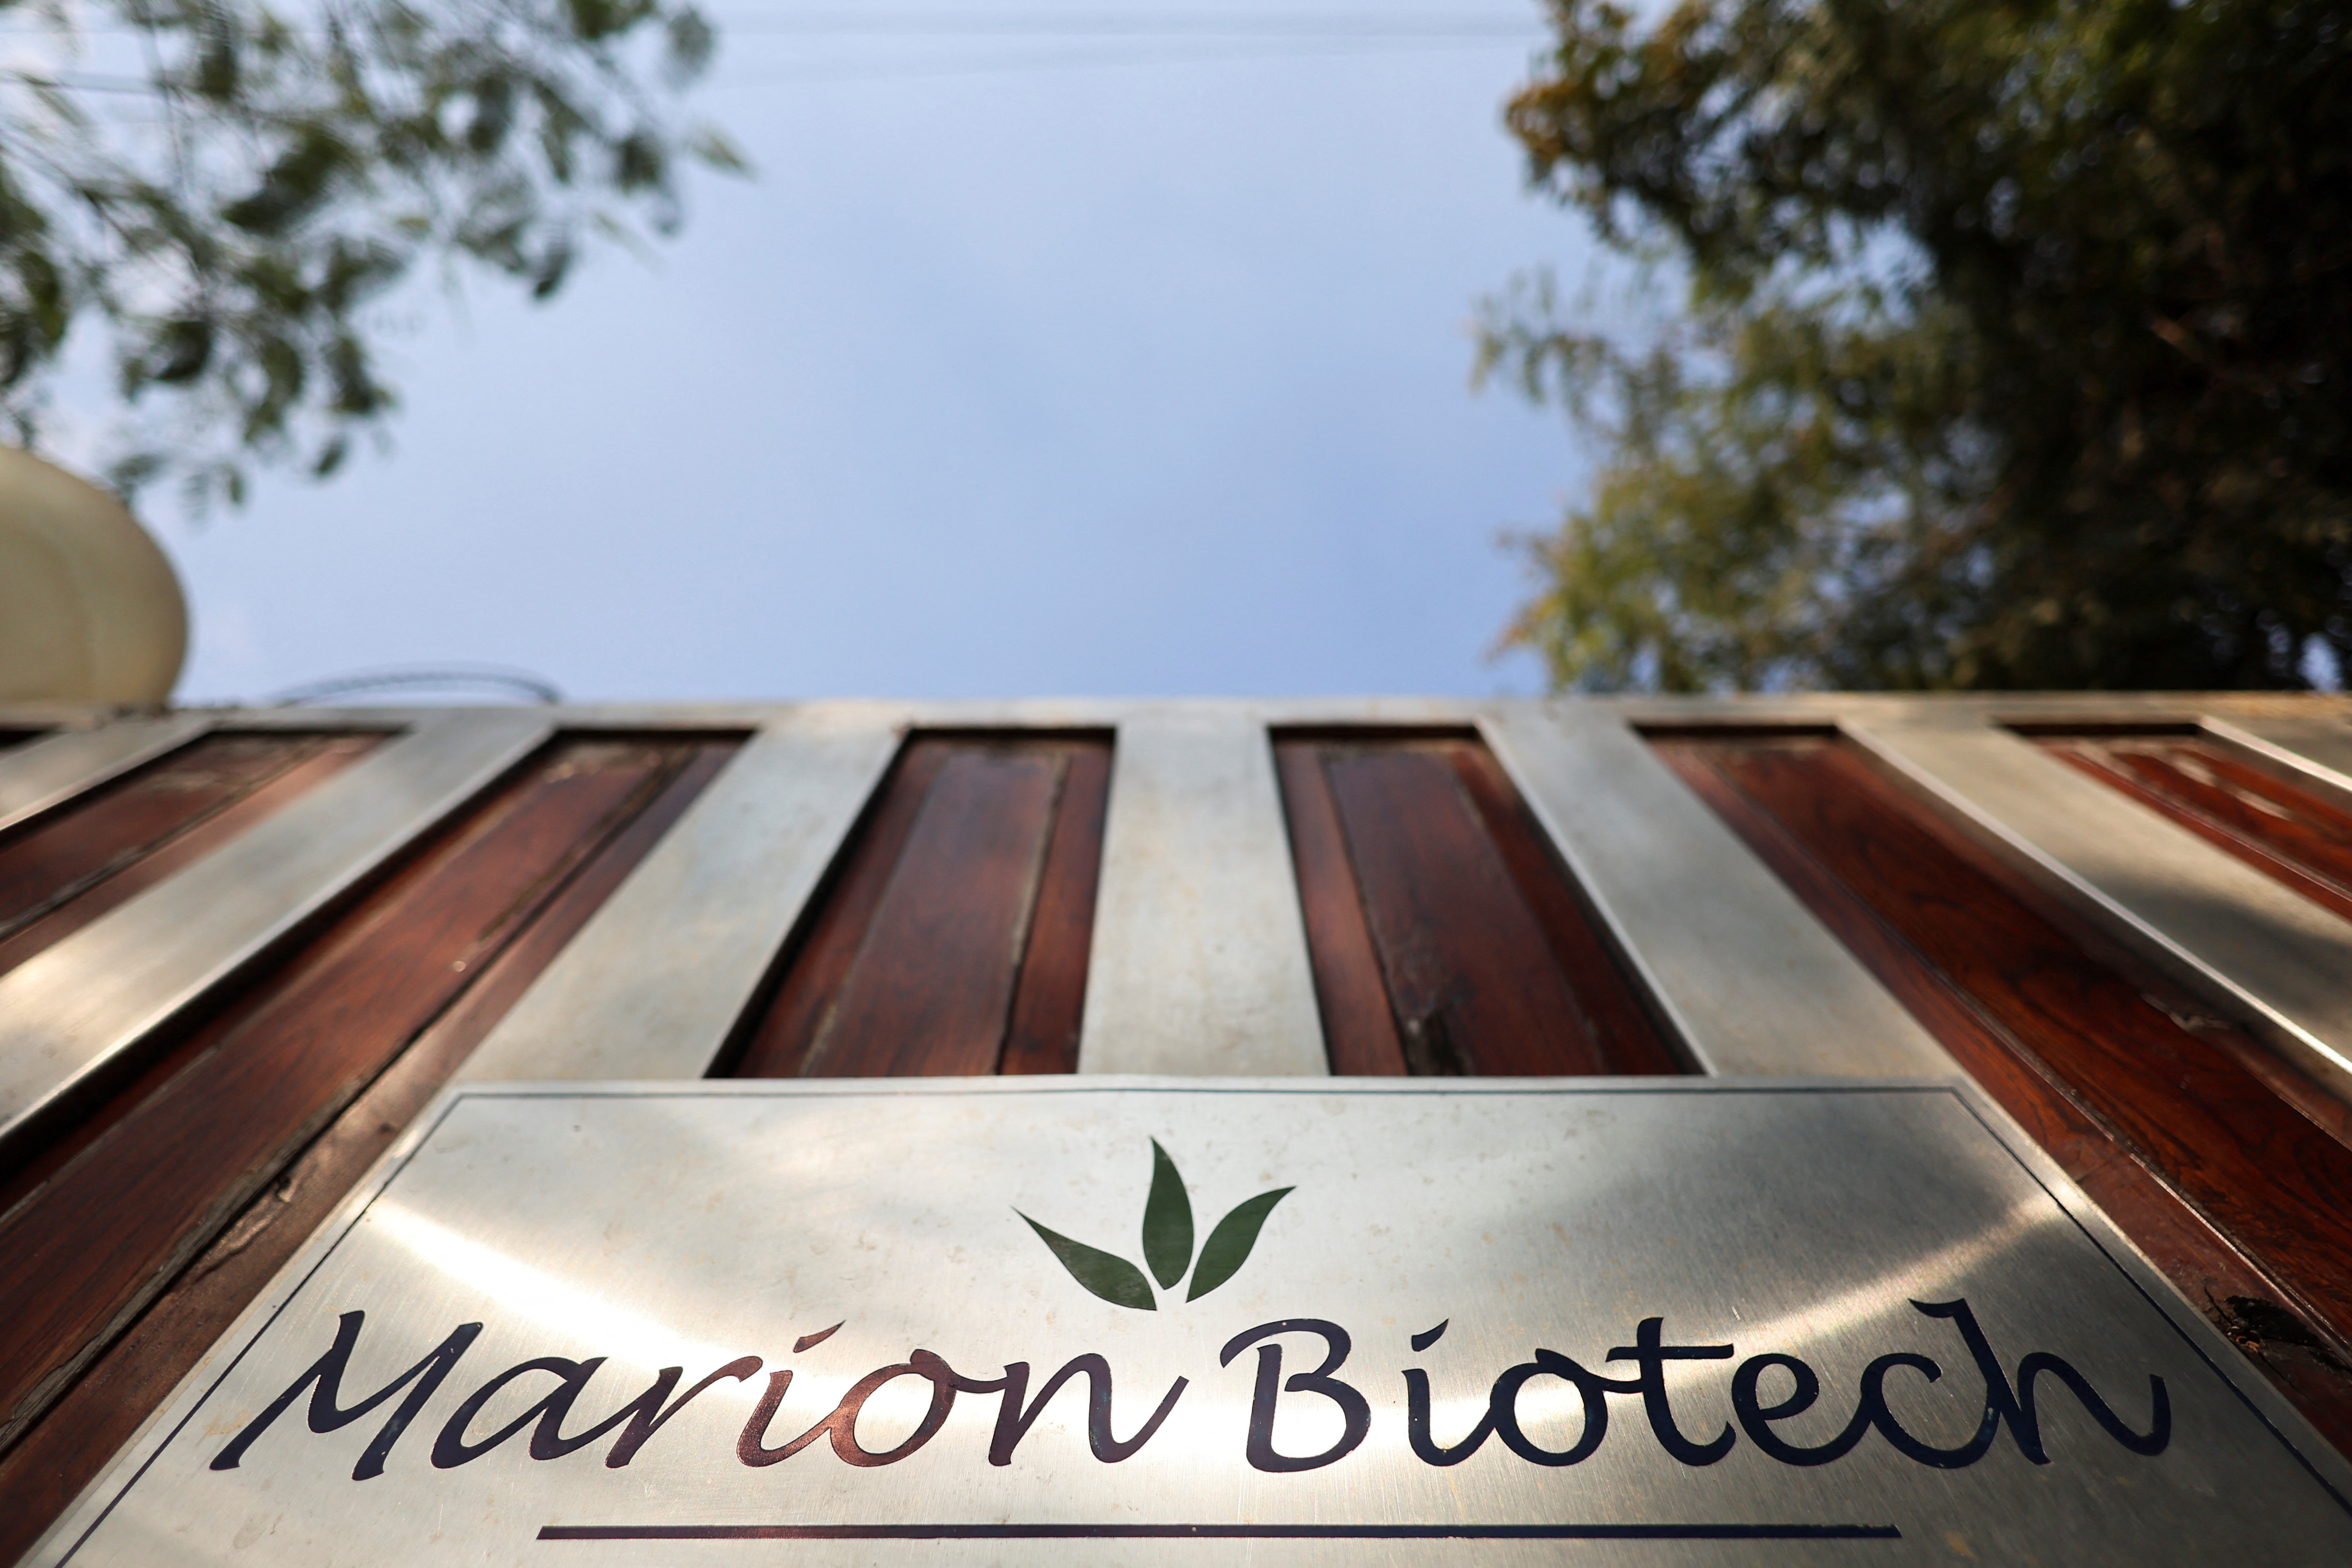 The logo of Marion Biotech, a healthcare and pharmaceutical company, is seen on the gate outside its office in Noida